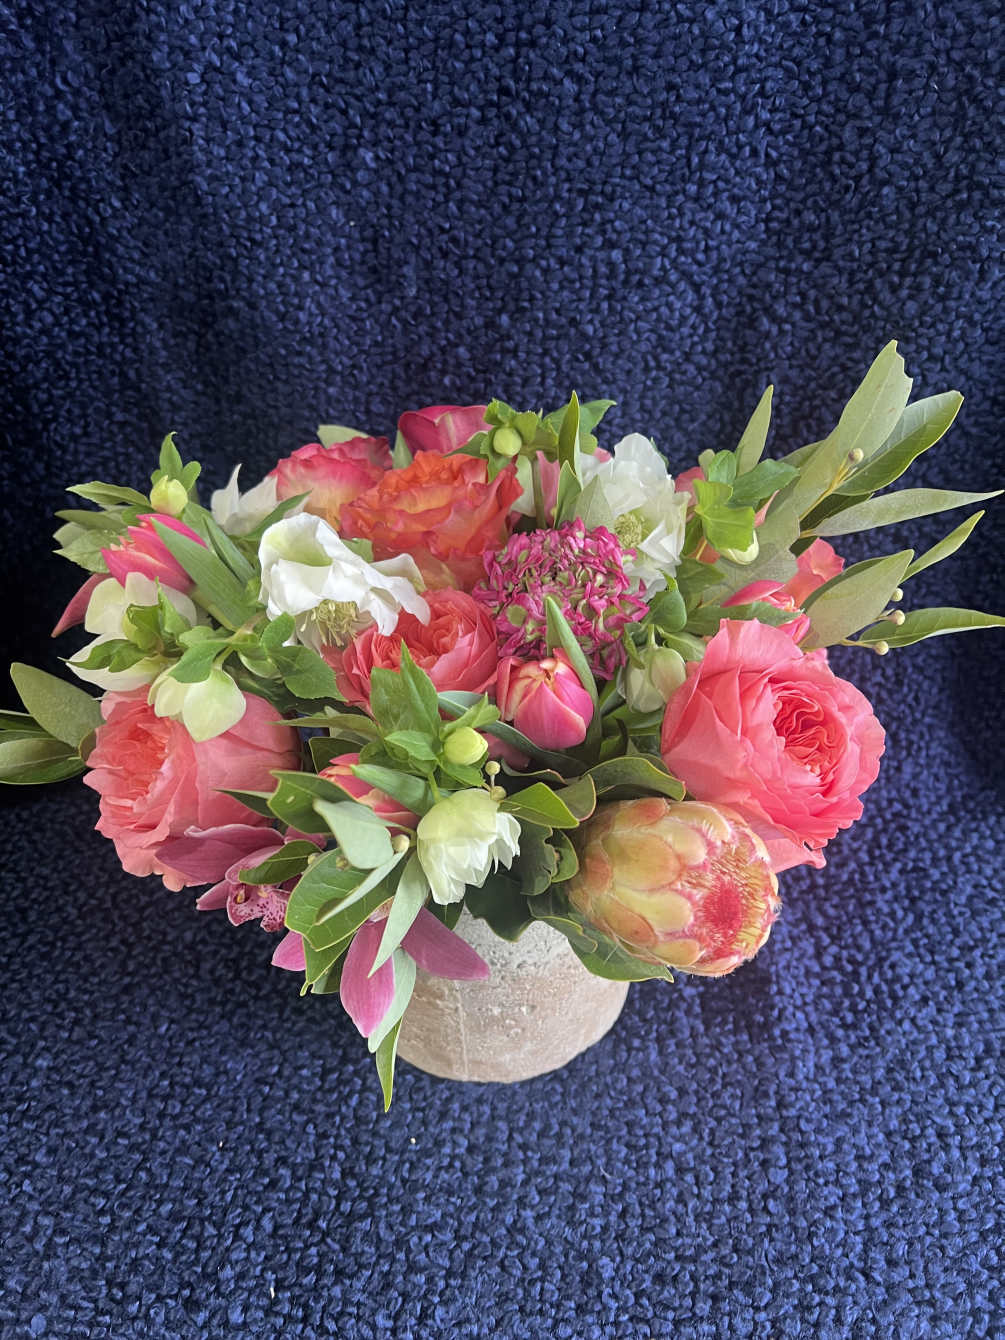 Grandiflora protea accented with free spirit, candy expression tulips, ranuculus, mini-cymbidium orchid